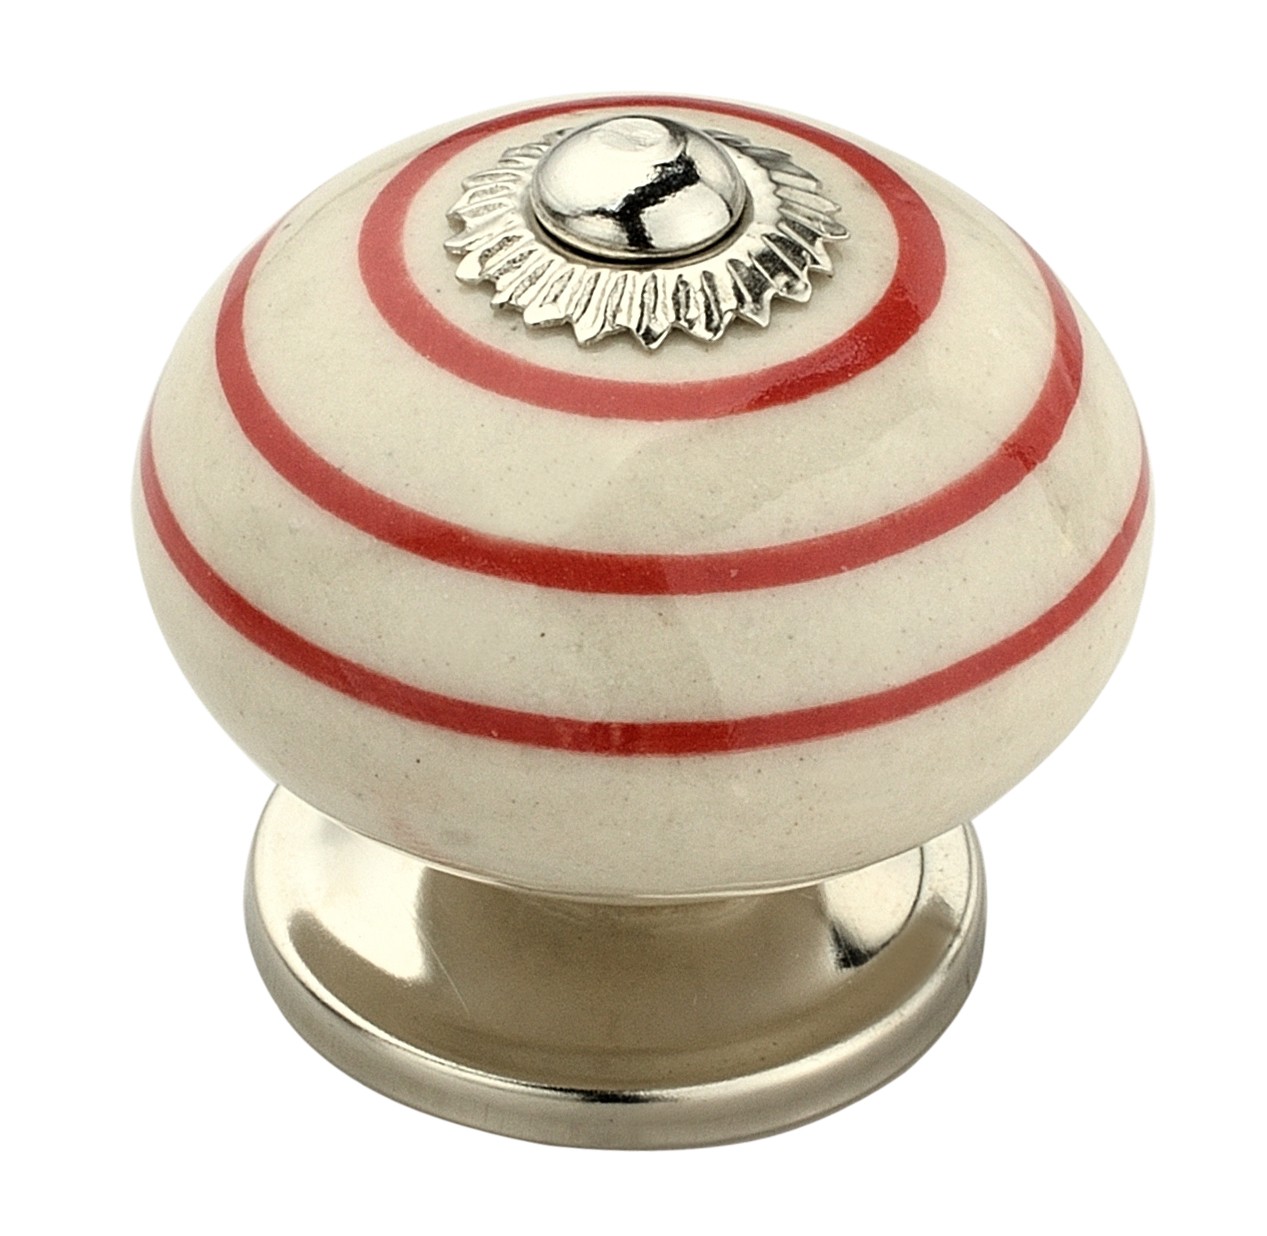 Ringed 1-3/5 in. (41mm) Red & Cream Cabinet Knob